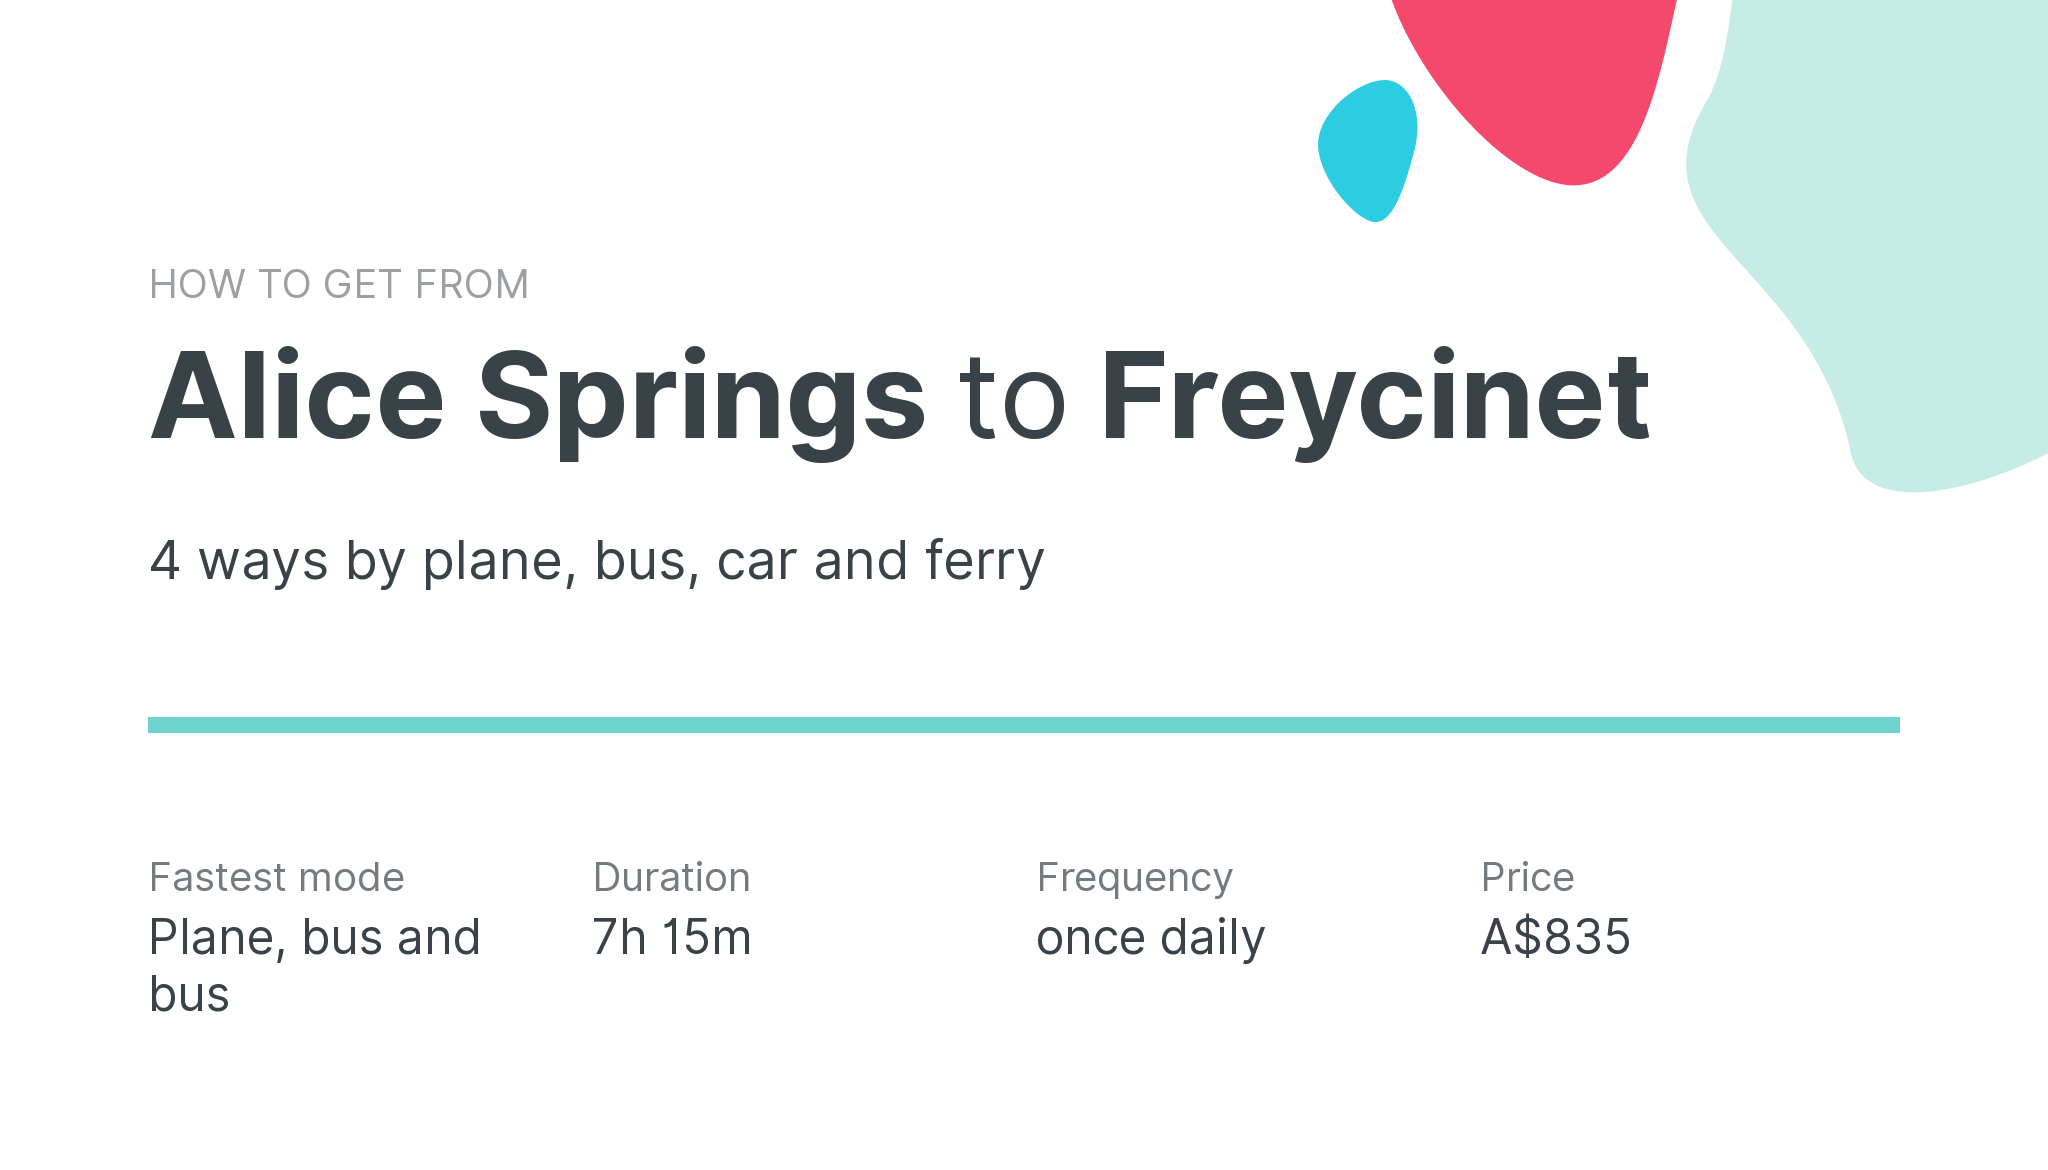 How do I get from Alice Springs to Freycinet